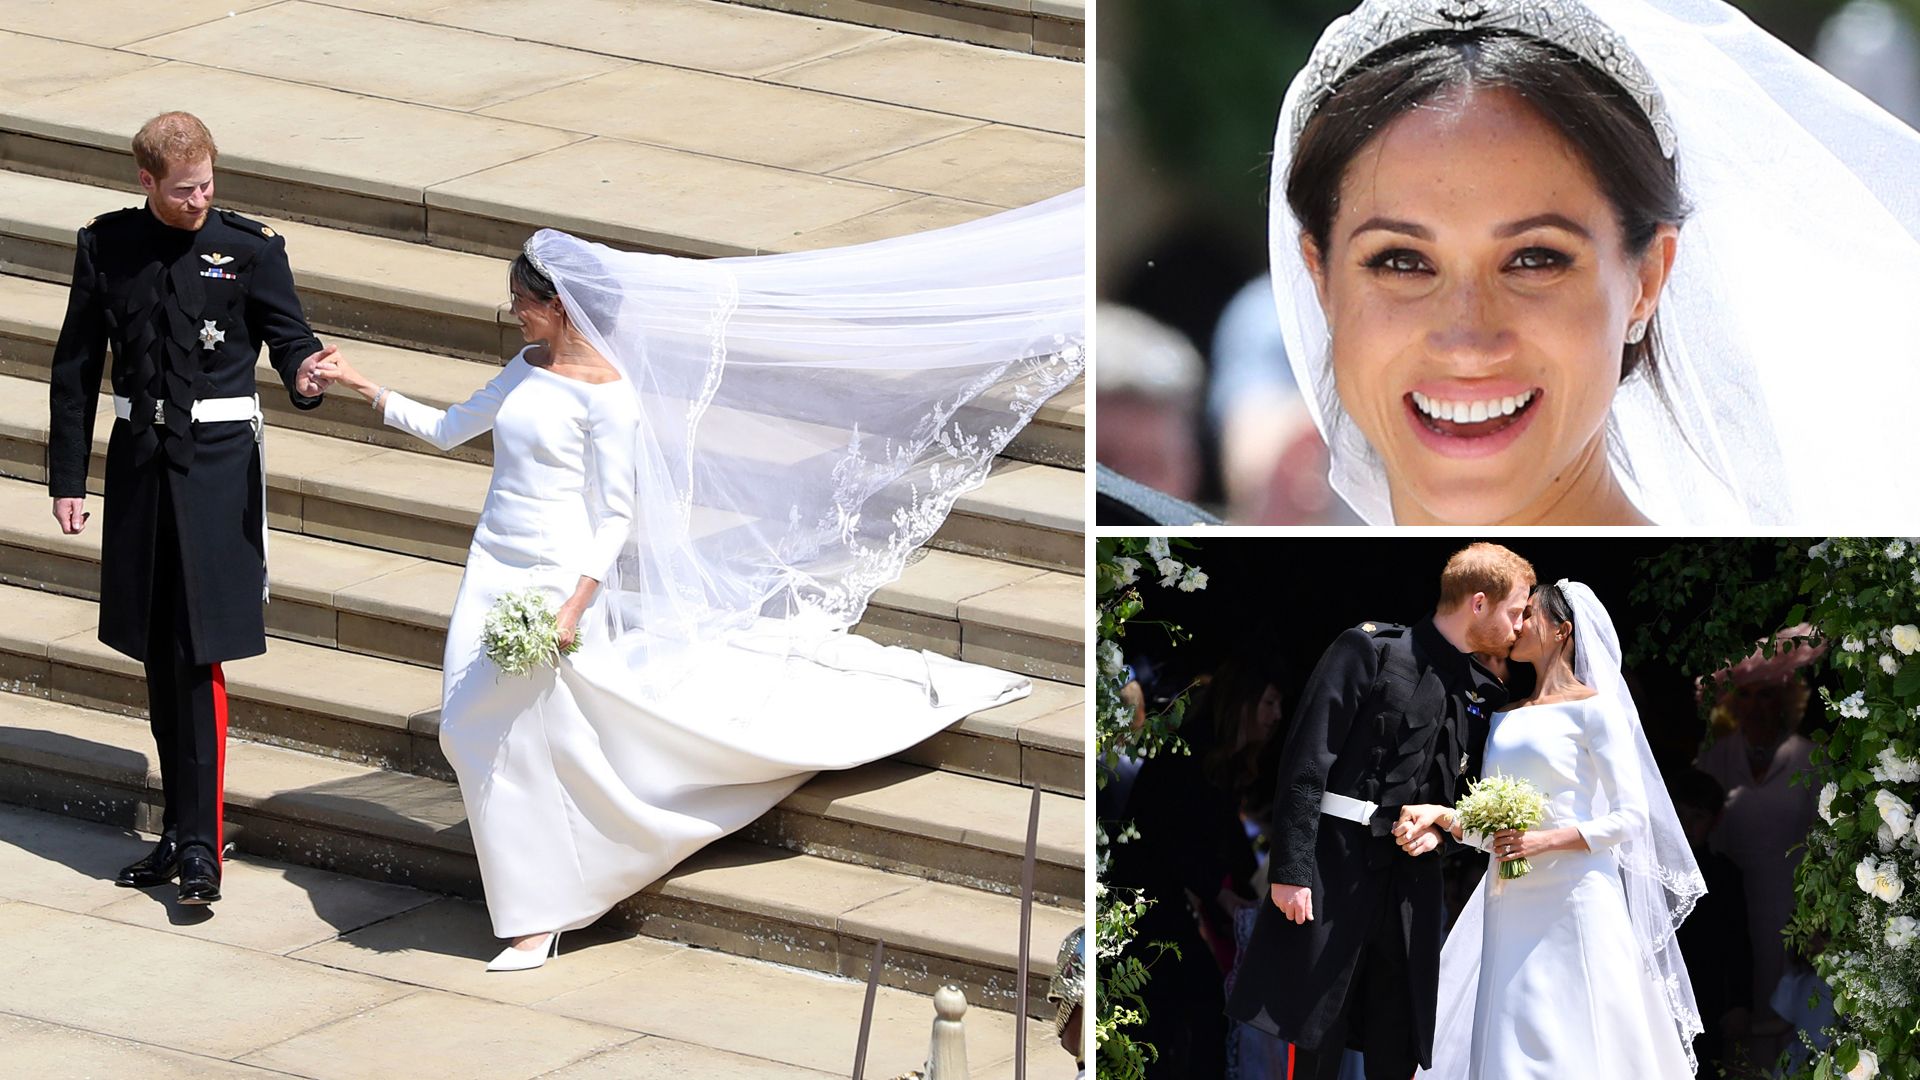 Compare Meghan Markle's Wedding Dress to Kate Middleton's Bridal Gown